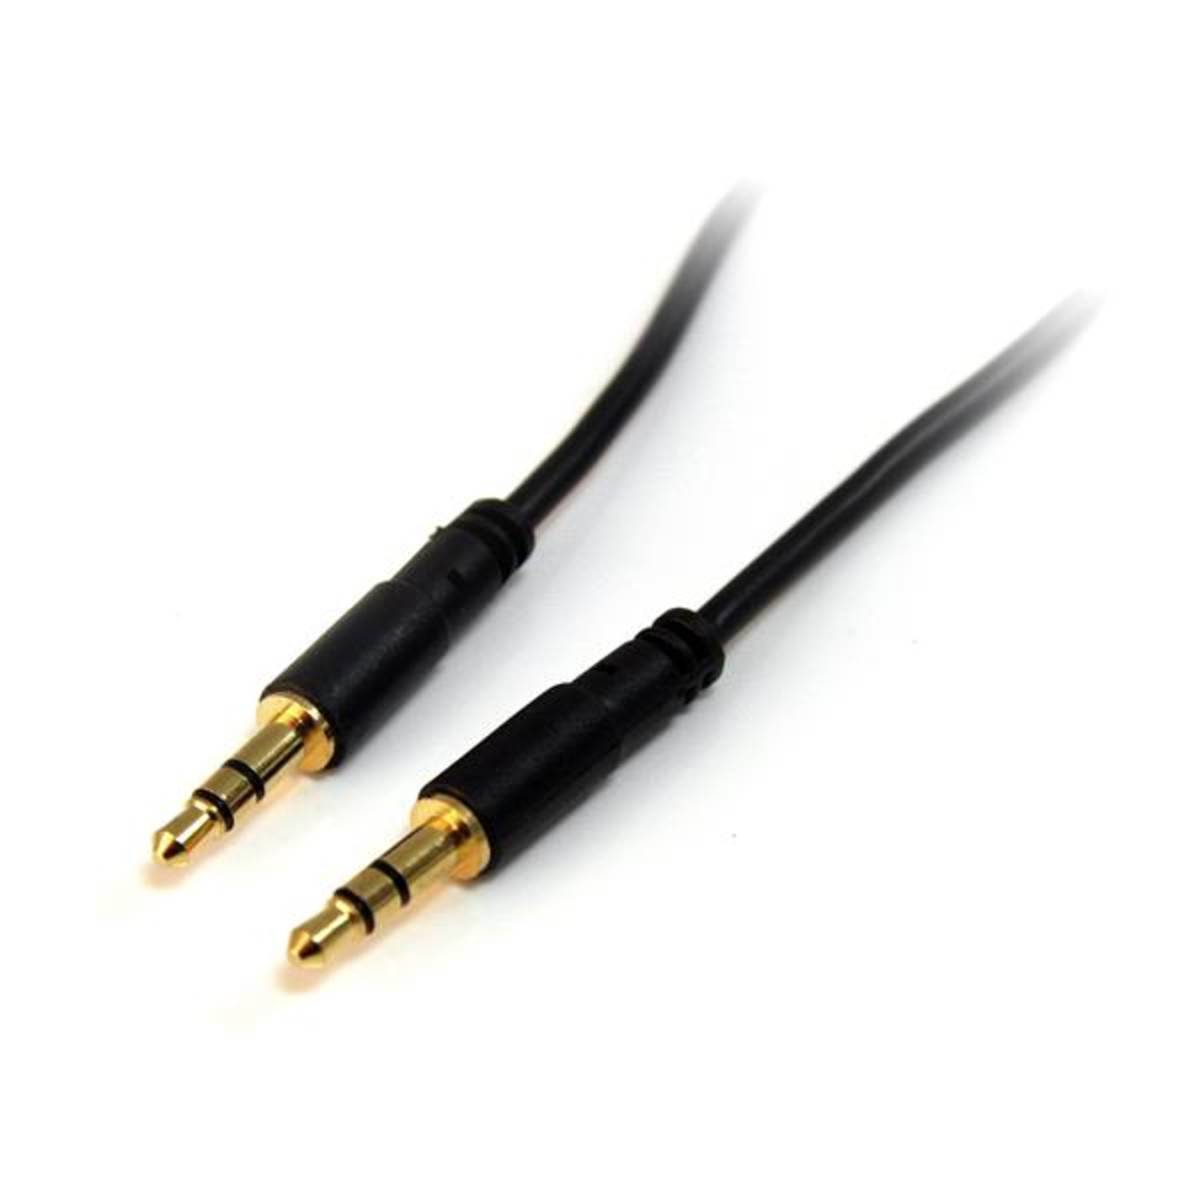 1 ft Slim 3.5mm Stereo Audio Cable